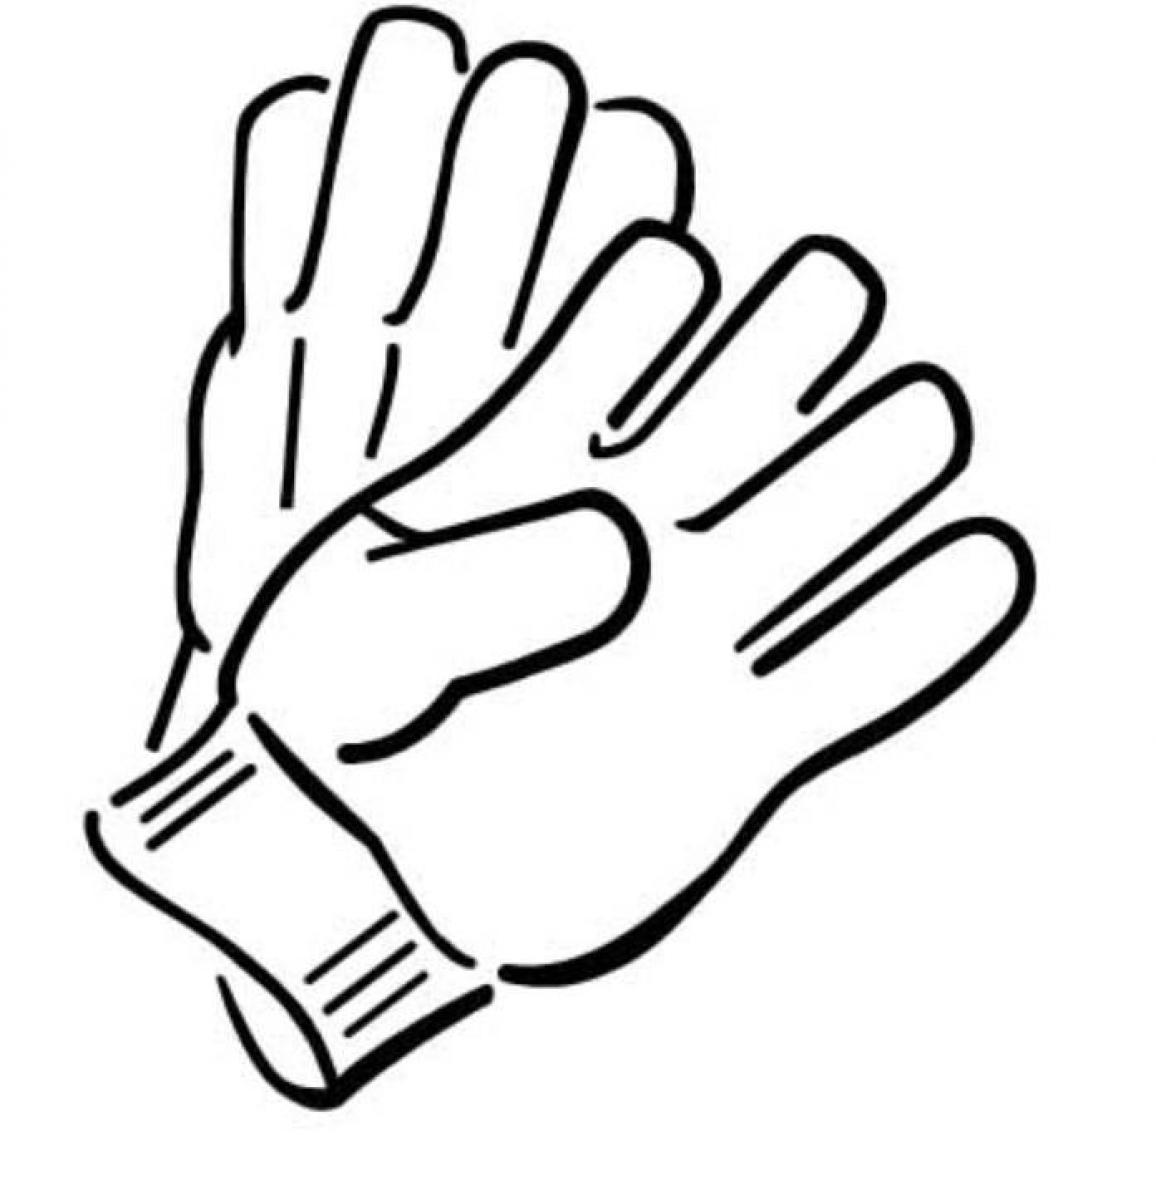 gloves winter clothes coloring page id 16433 : Uncategorized ...